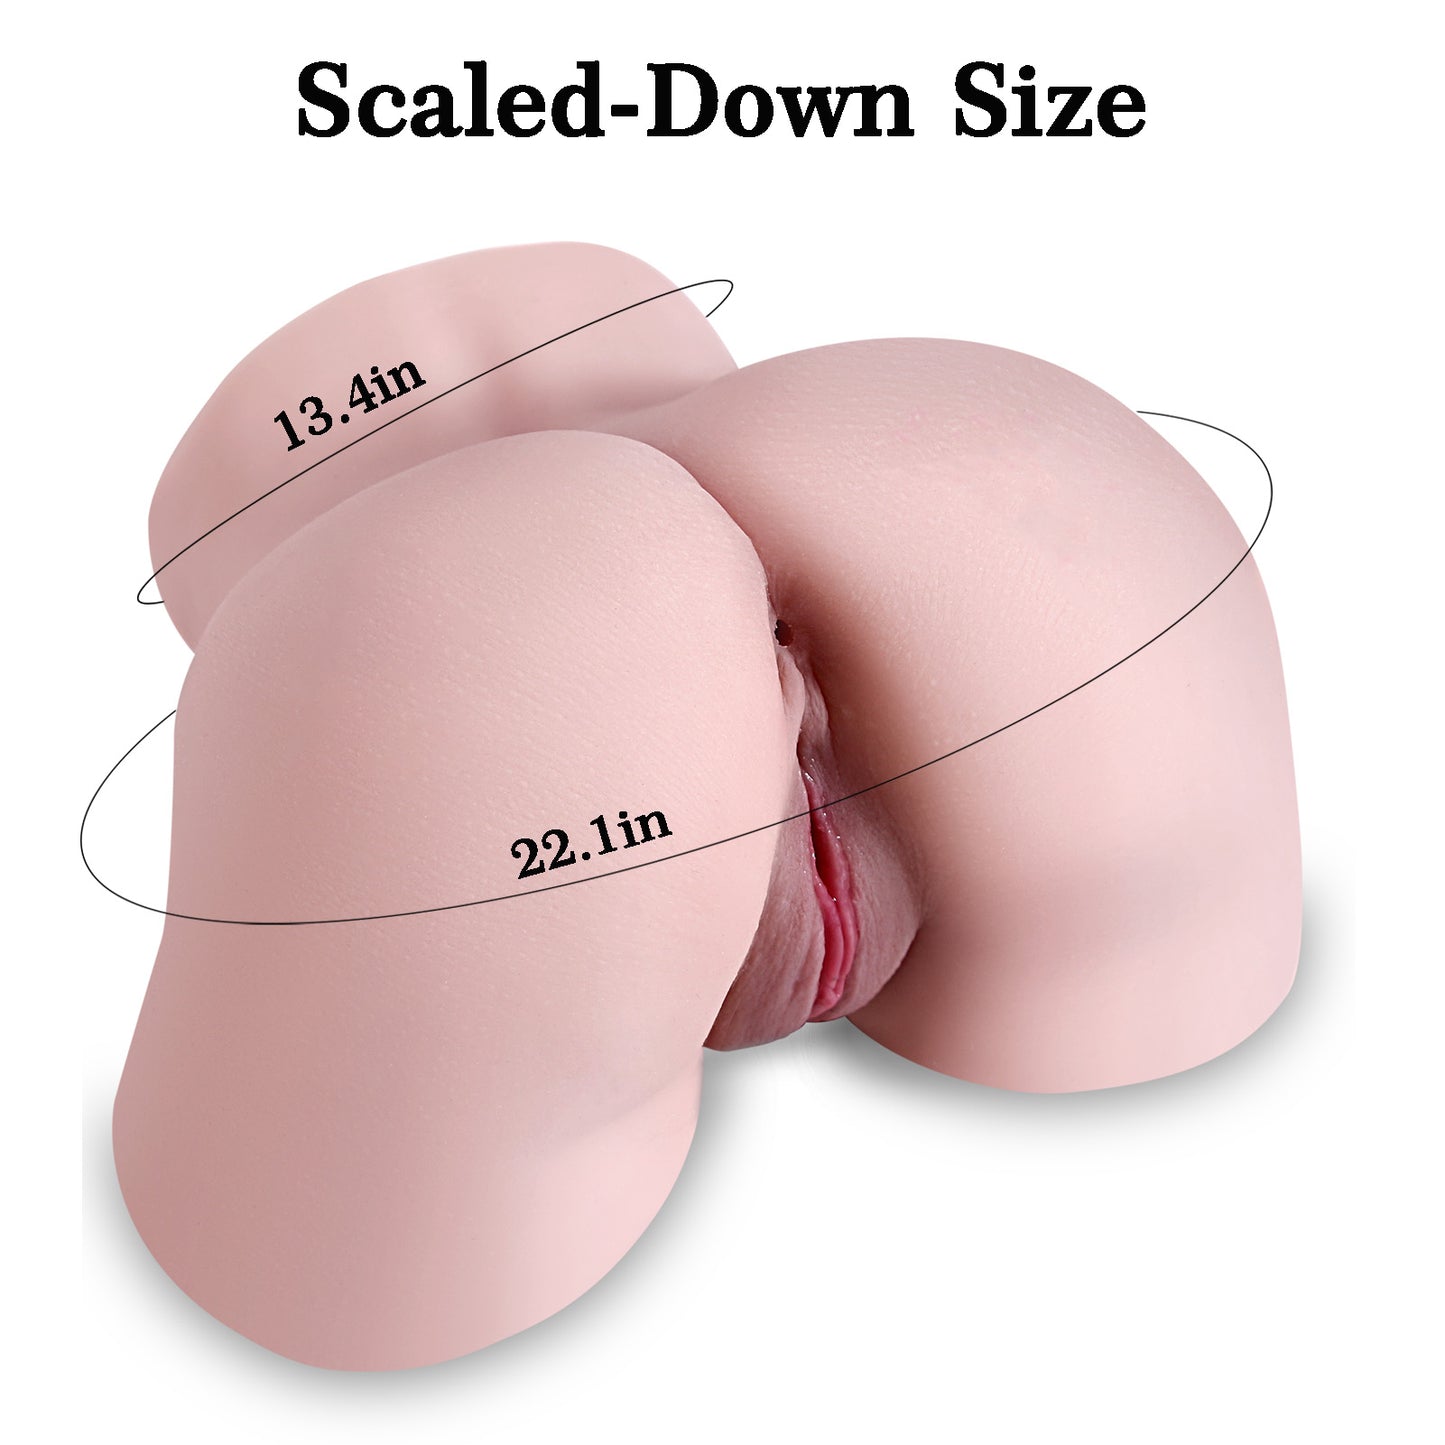 Sex Doll Male Sex Toy for Men, Pocket Pussy Ass Sex Dolls Torso Love Doll with Realistic Vagina Anus, Adult Sex Toys for Men (8.6X7.1X4.7In, 5.5LB)